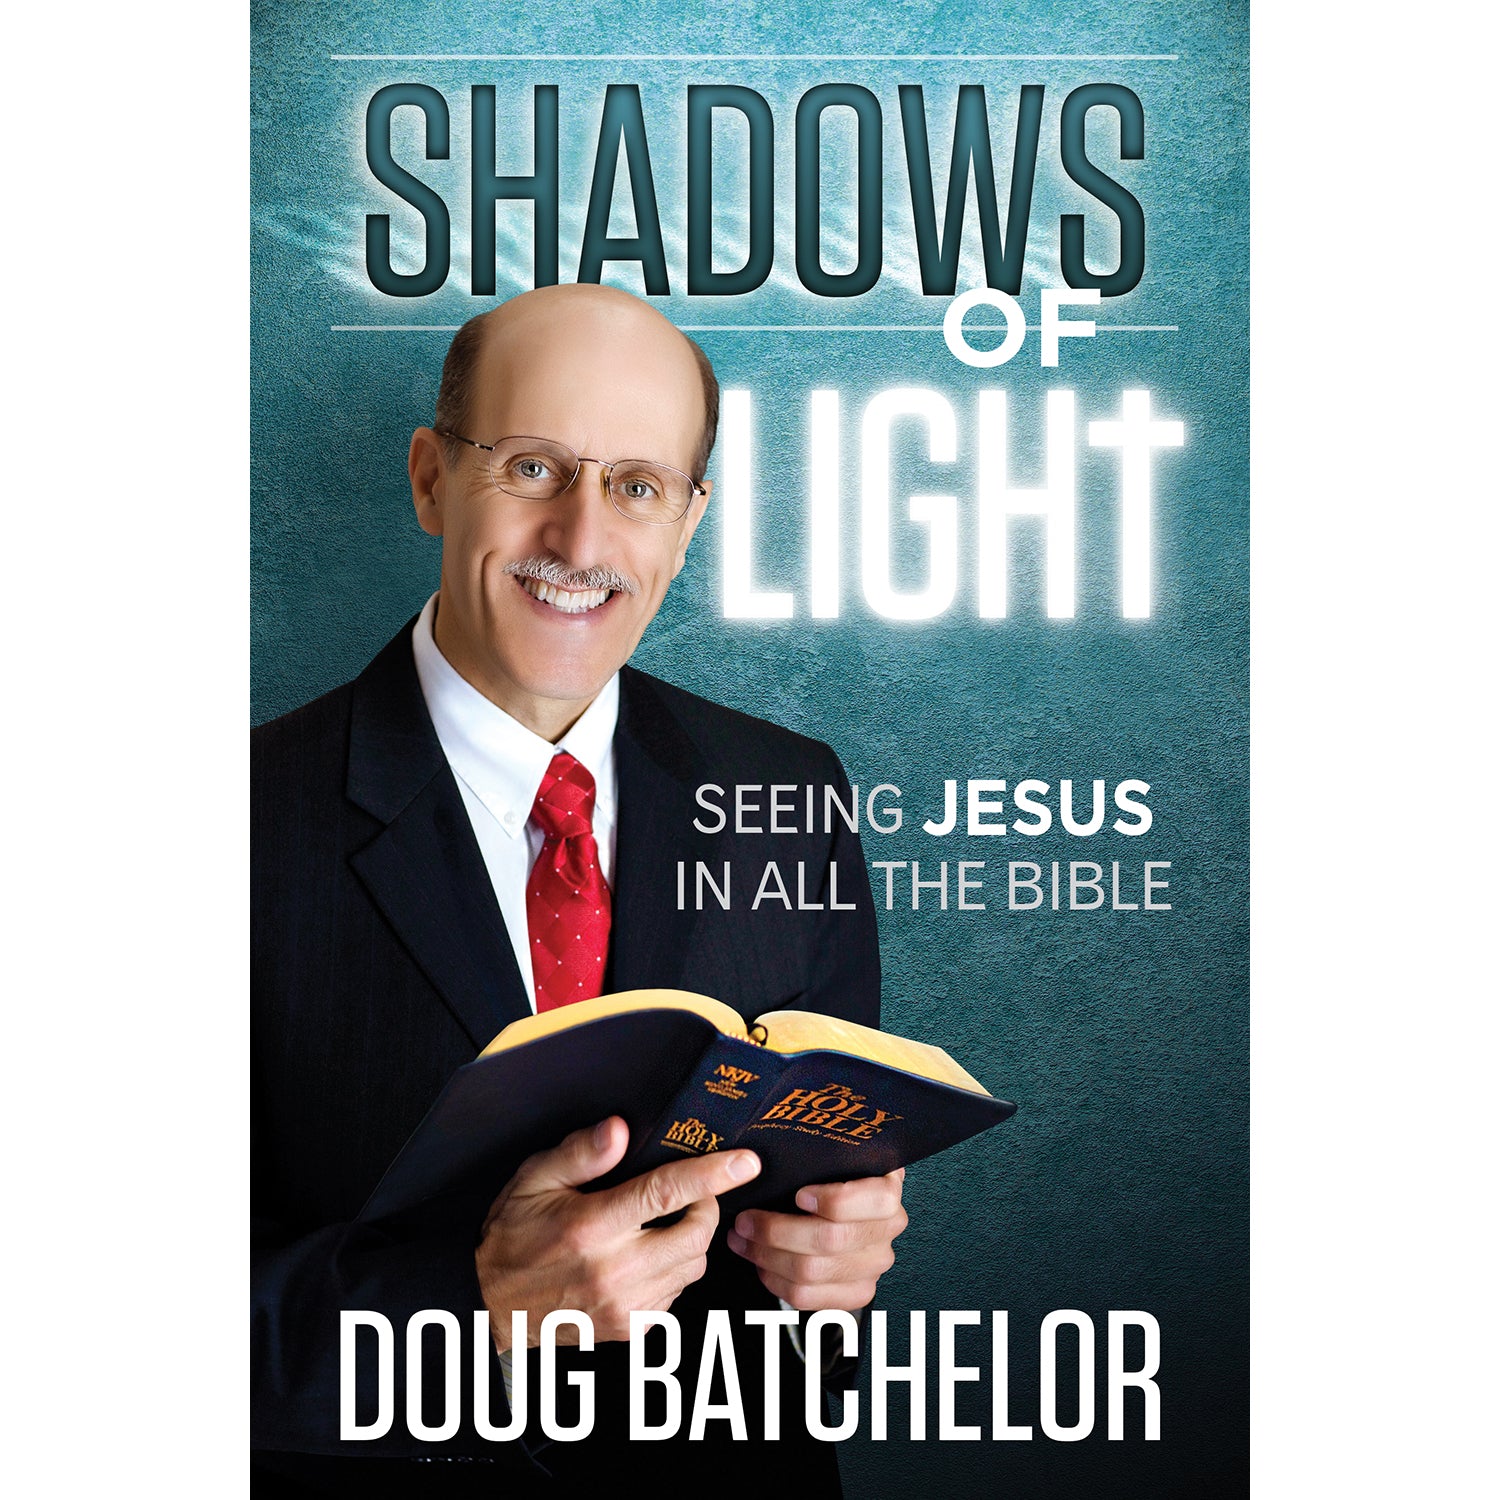 Shadows of Light: Seeing Jesus in All the Bible by Doug Batchelor